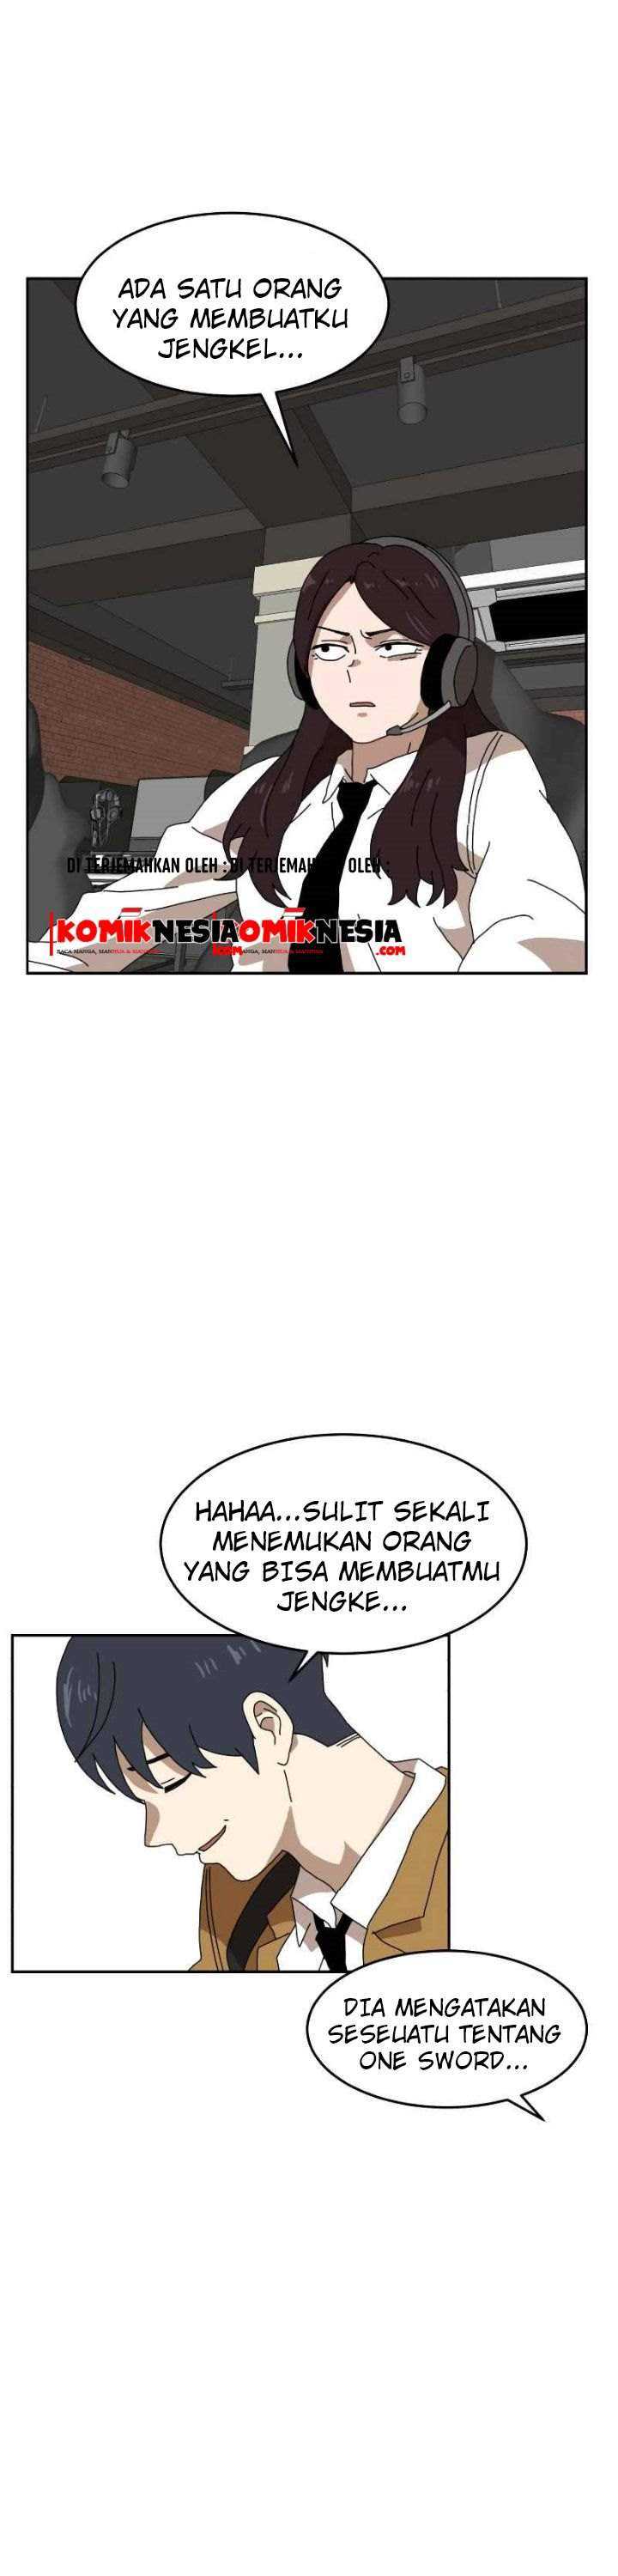 Double Click Chapter 03